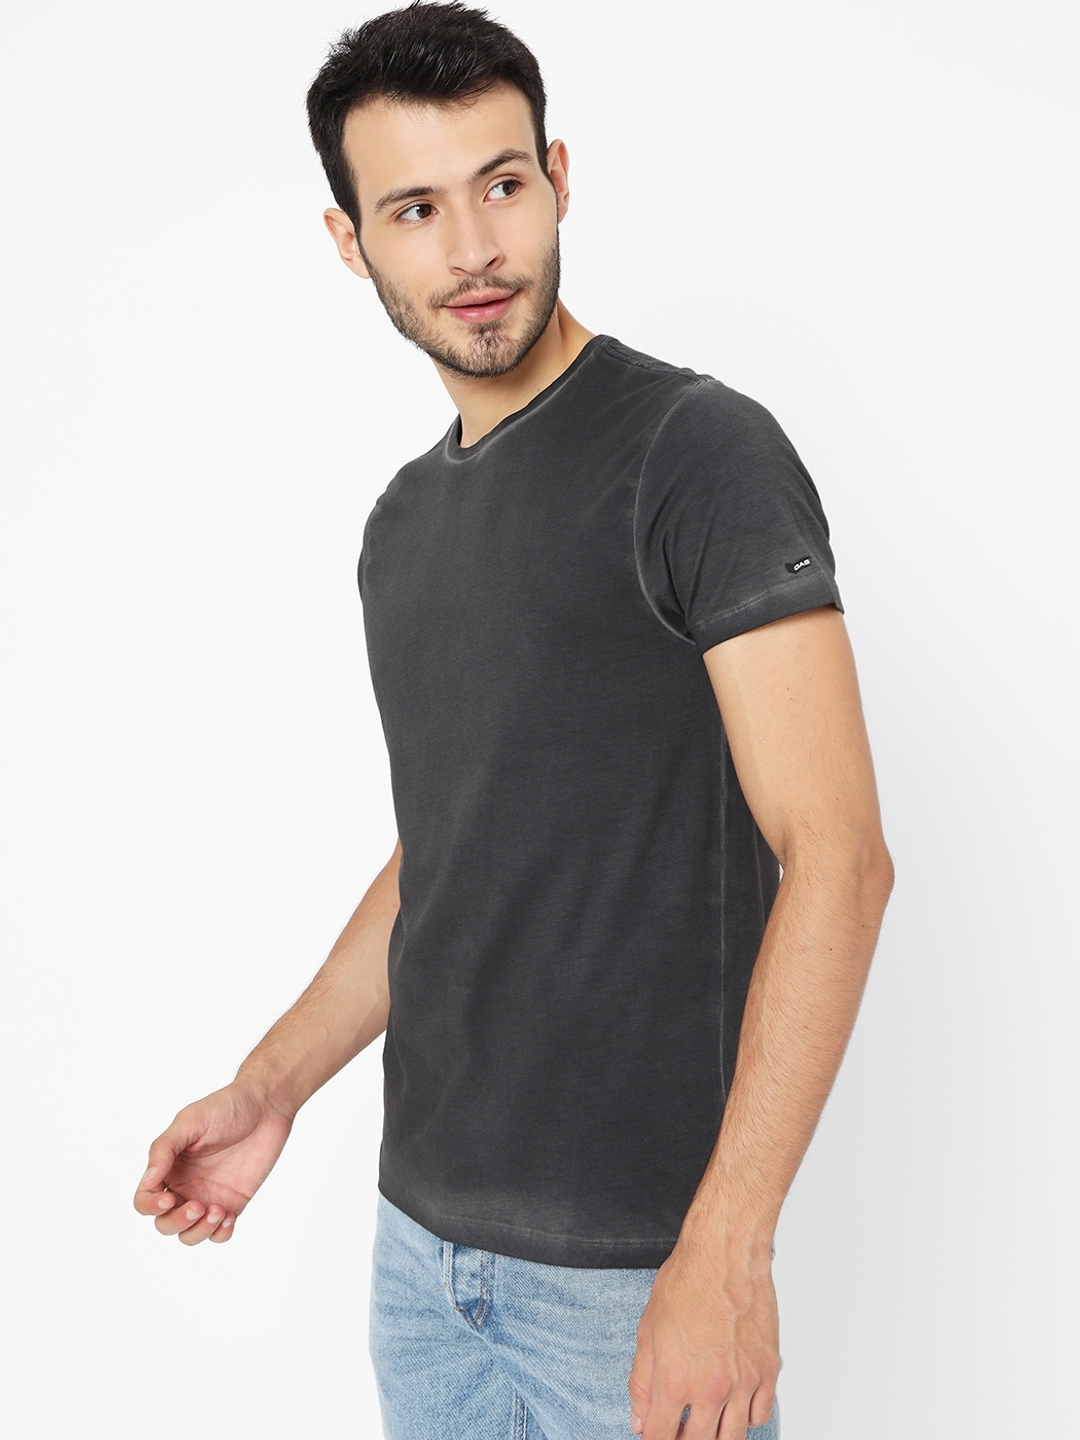 The Classic T-Shirt Company's T-Shirt Style Guide For Men